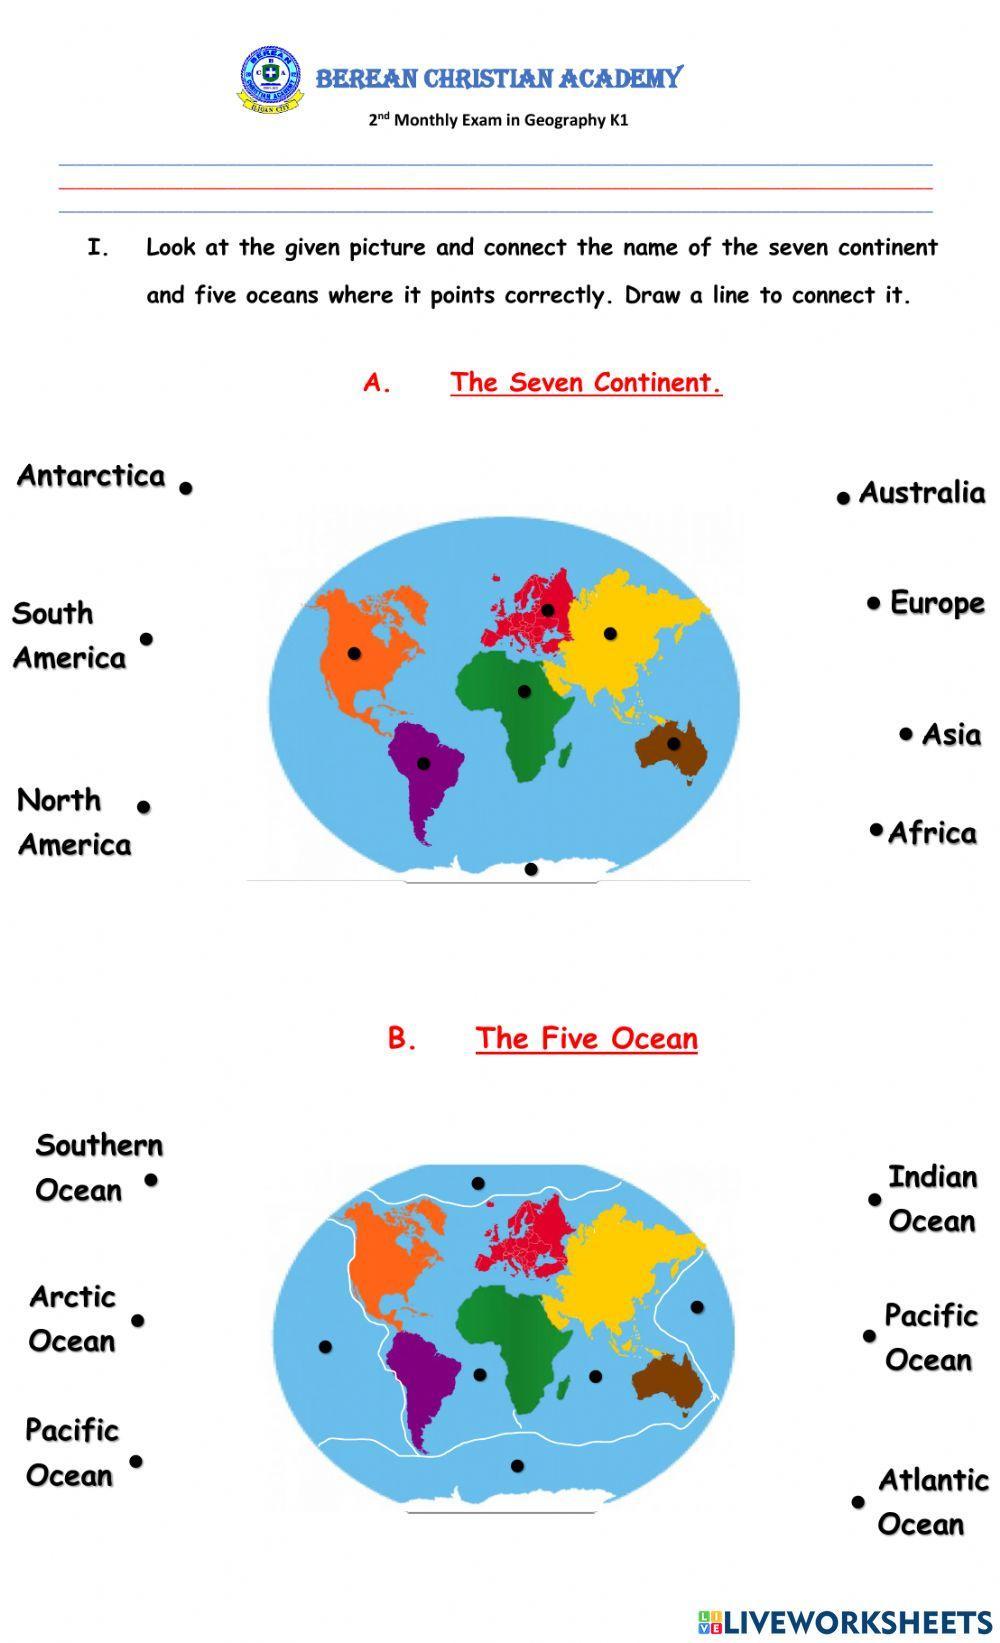 Seven continent and five ocean